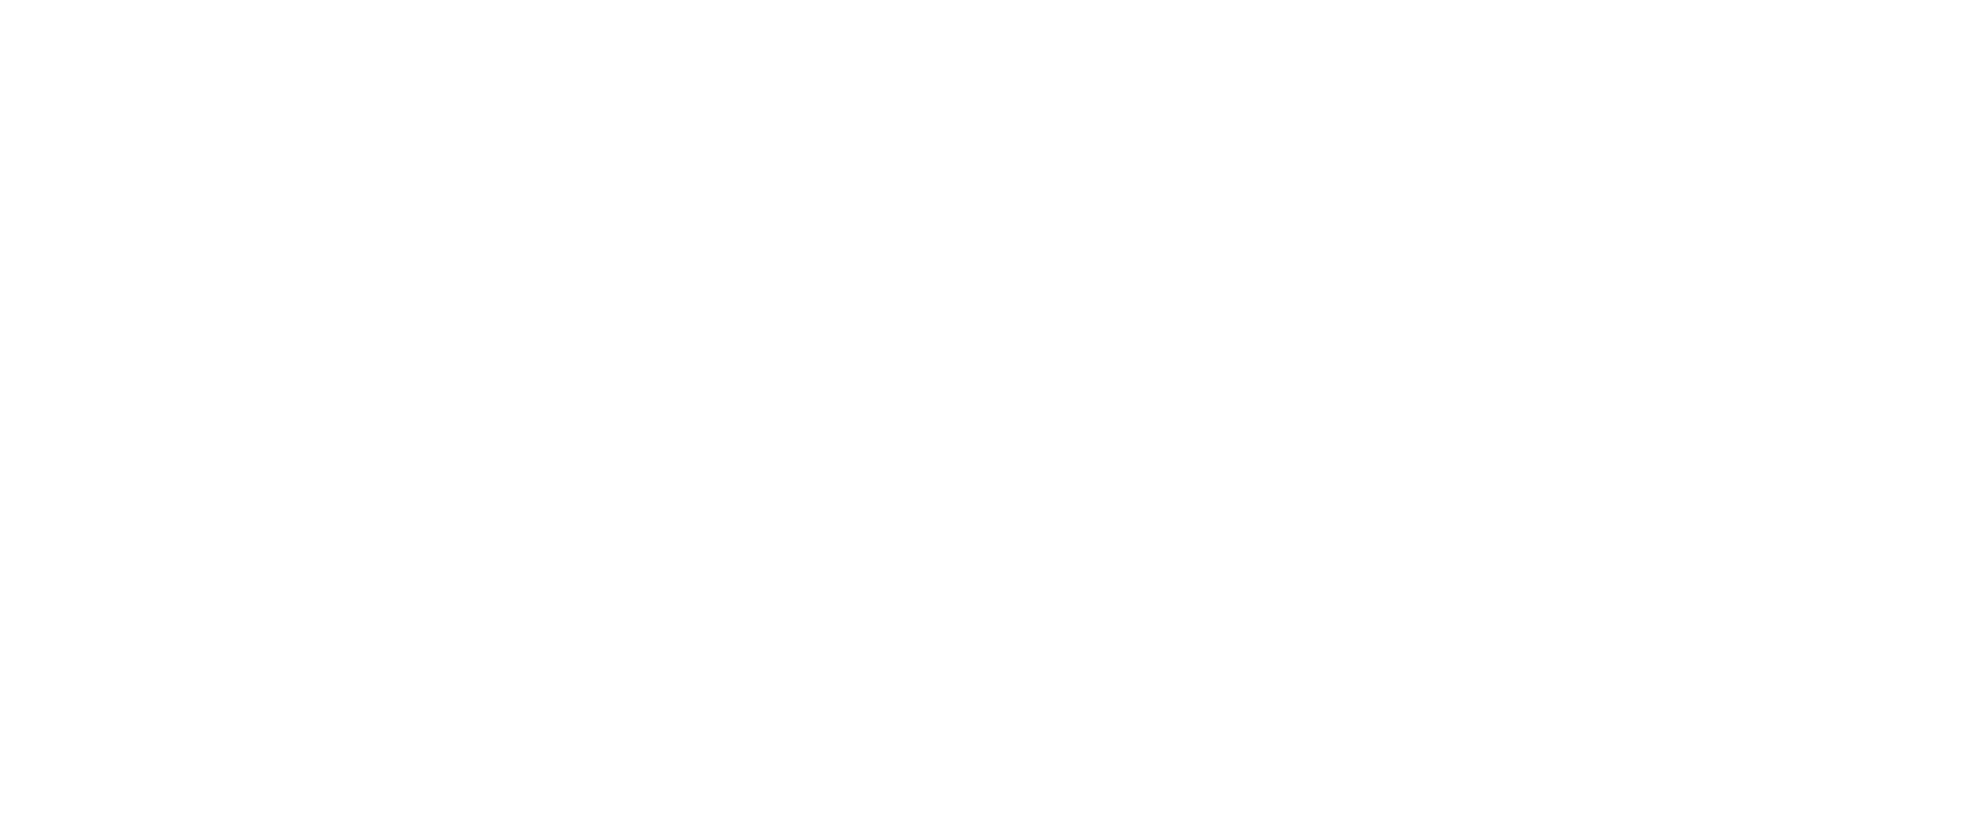 Total Promotions Logo